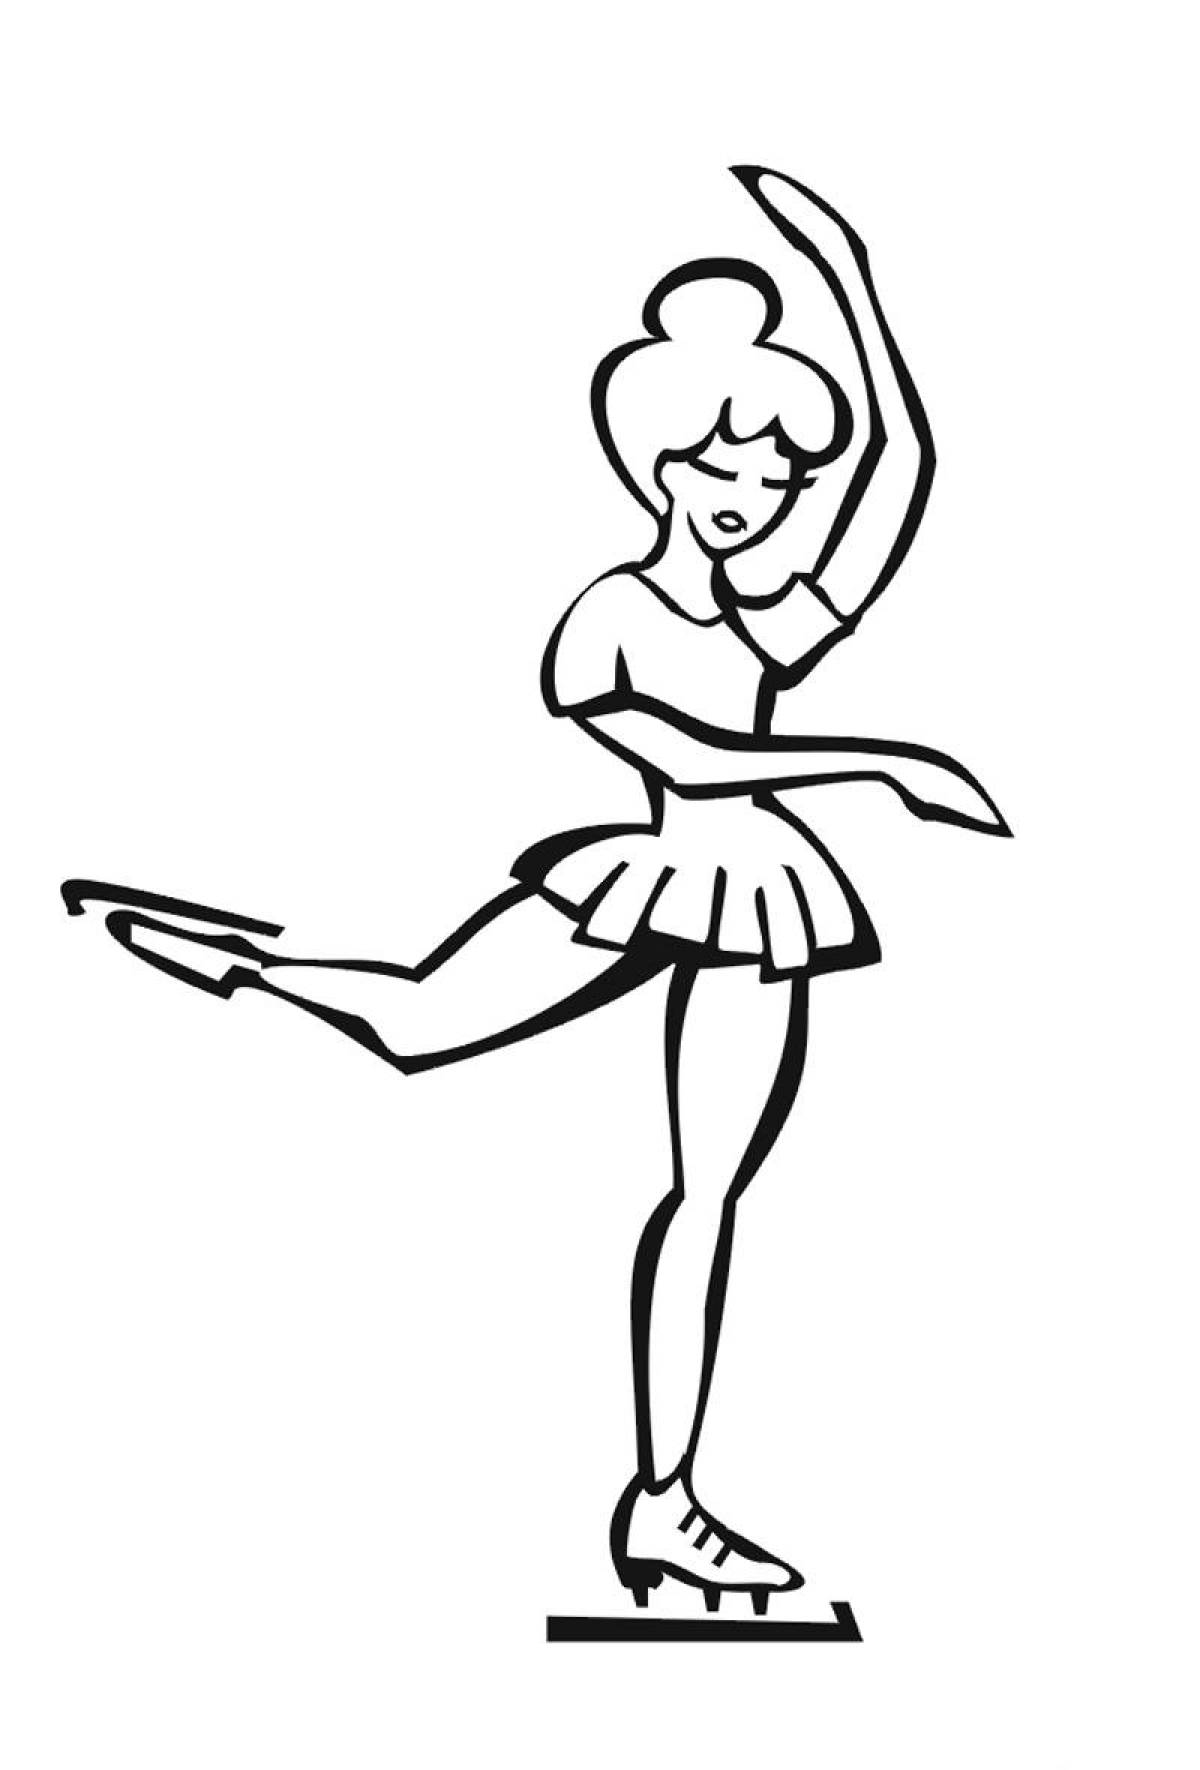 Colorful figure skating coloring page